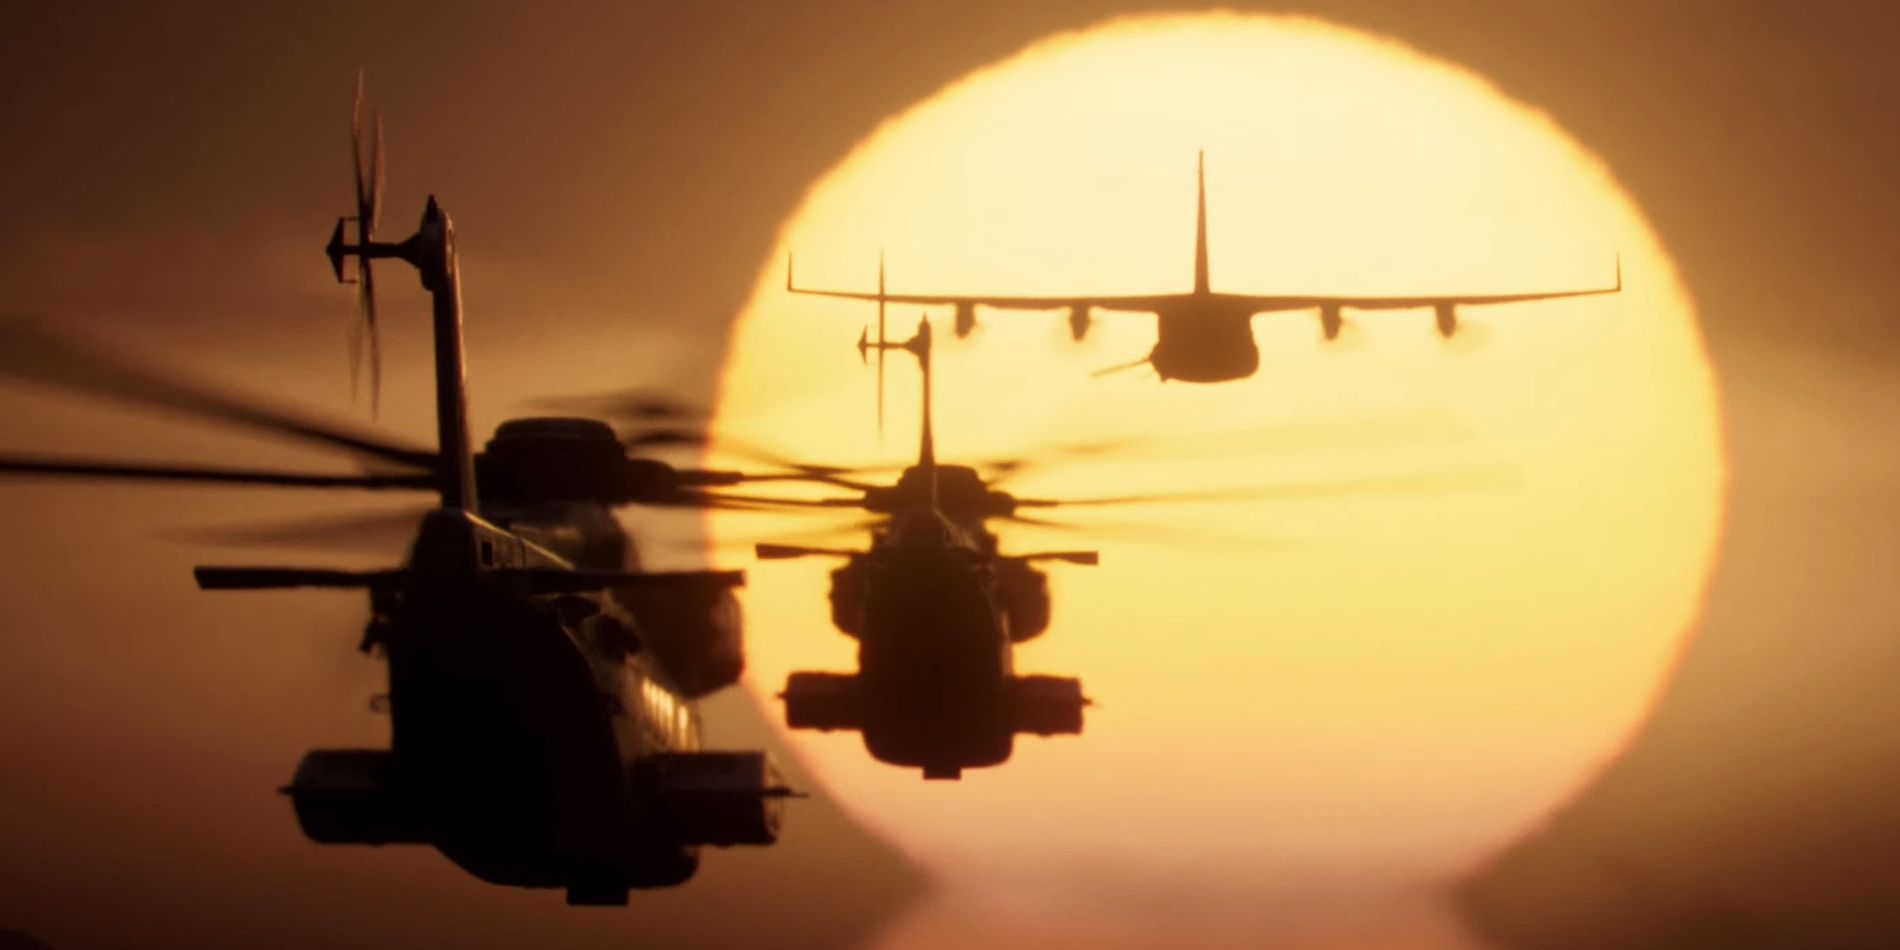 Screenshot from Call of Duty MW3 cinematic shows a AC 130 plan flying towards the sun with two helicopters following it.